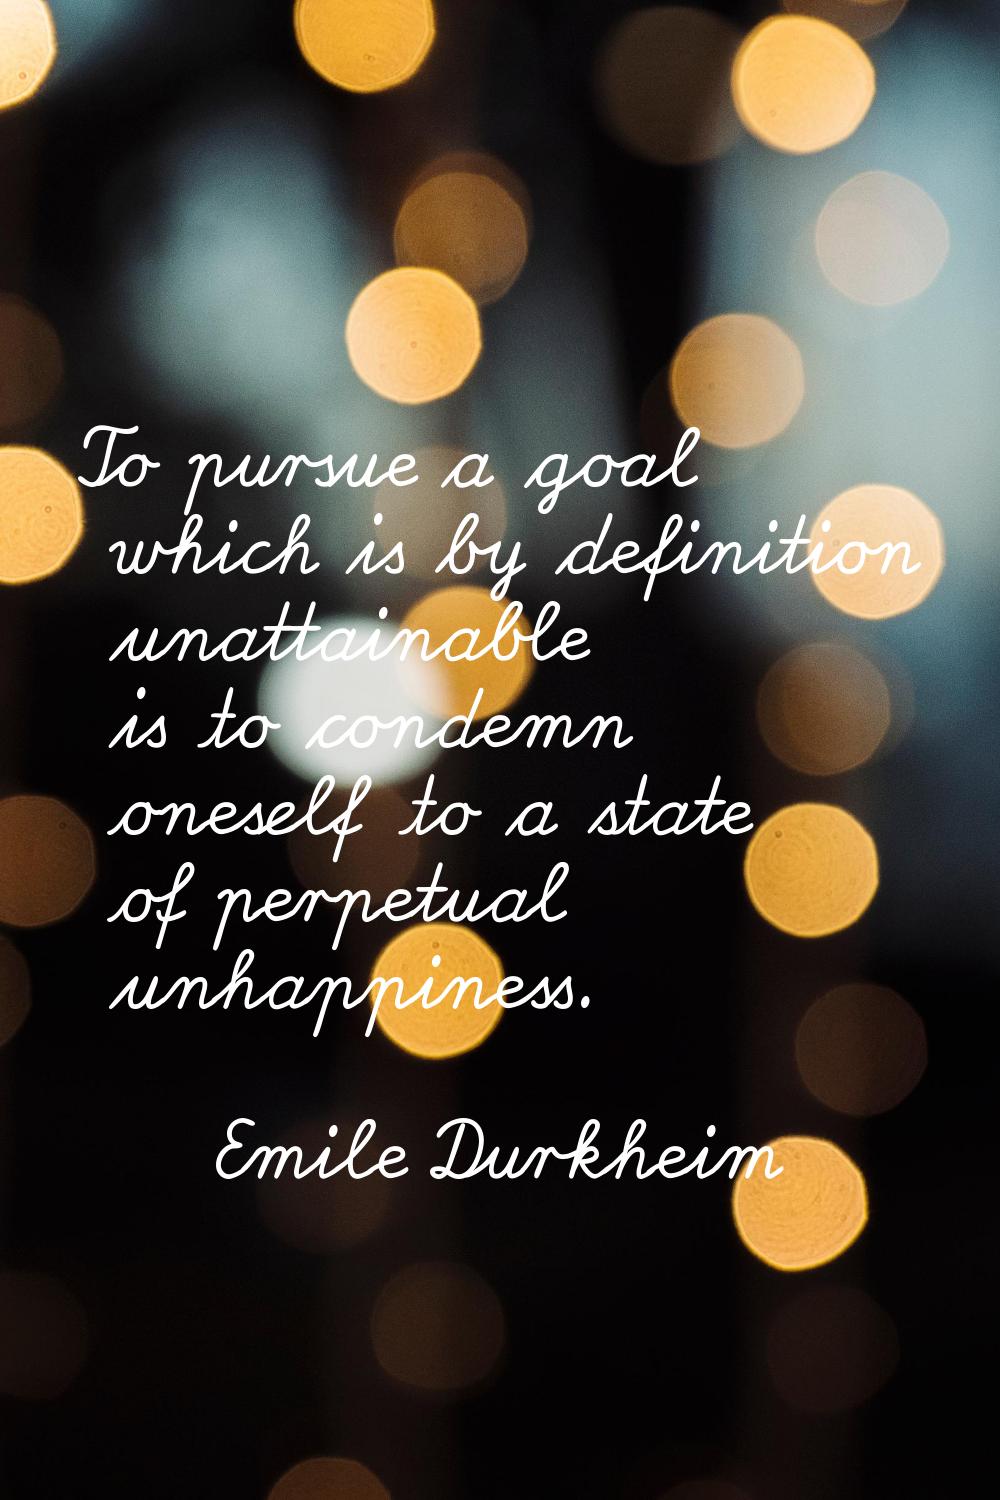 To pursue a goal which is by definition unattainable is to condemn oneself to a state of perpetual 